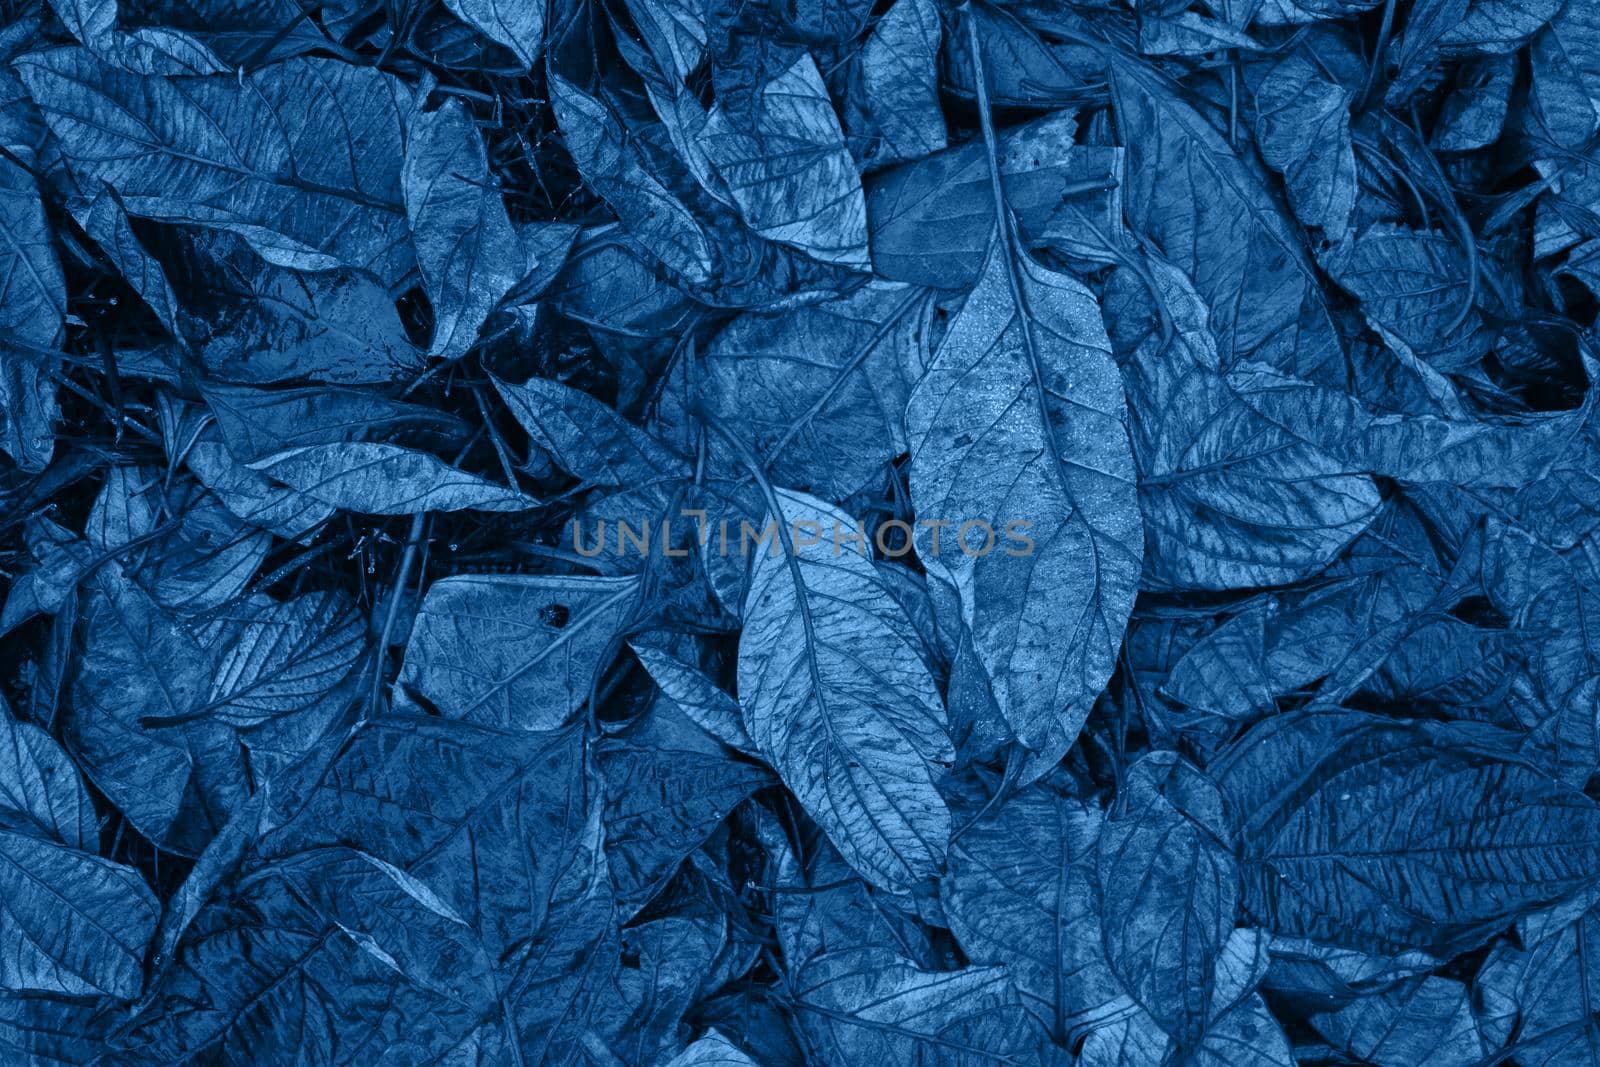 Classic blue monochrome moody dark art floral photo with a little dried leaves on dark dry brown background, winter backdrop